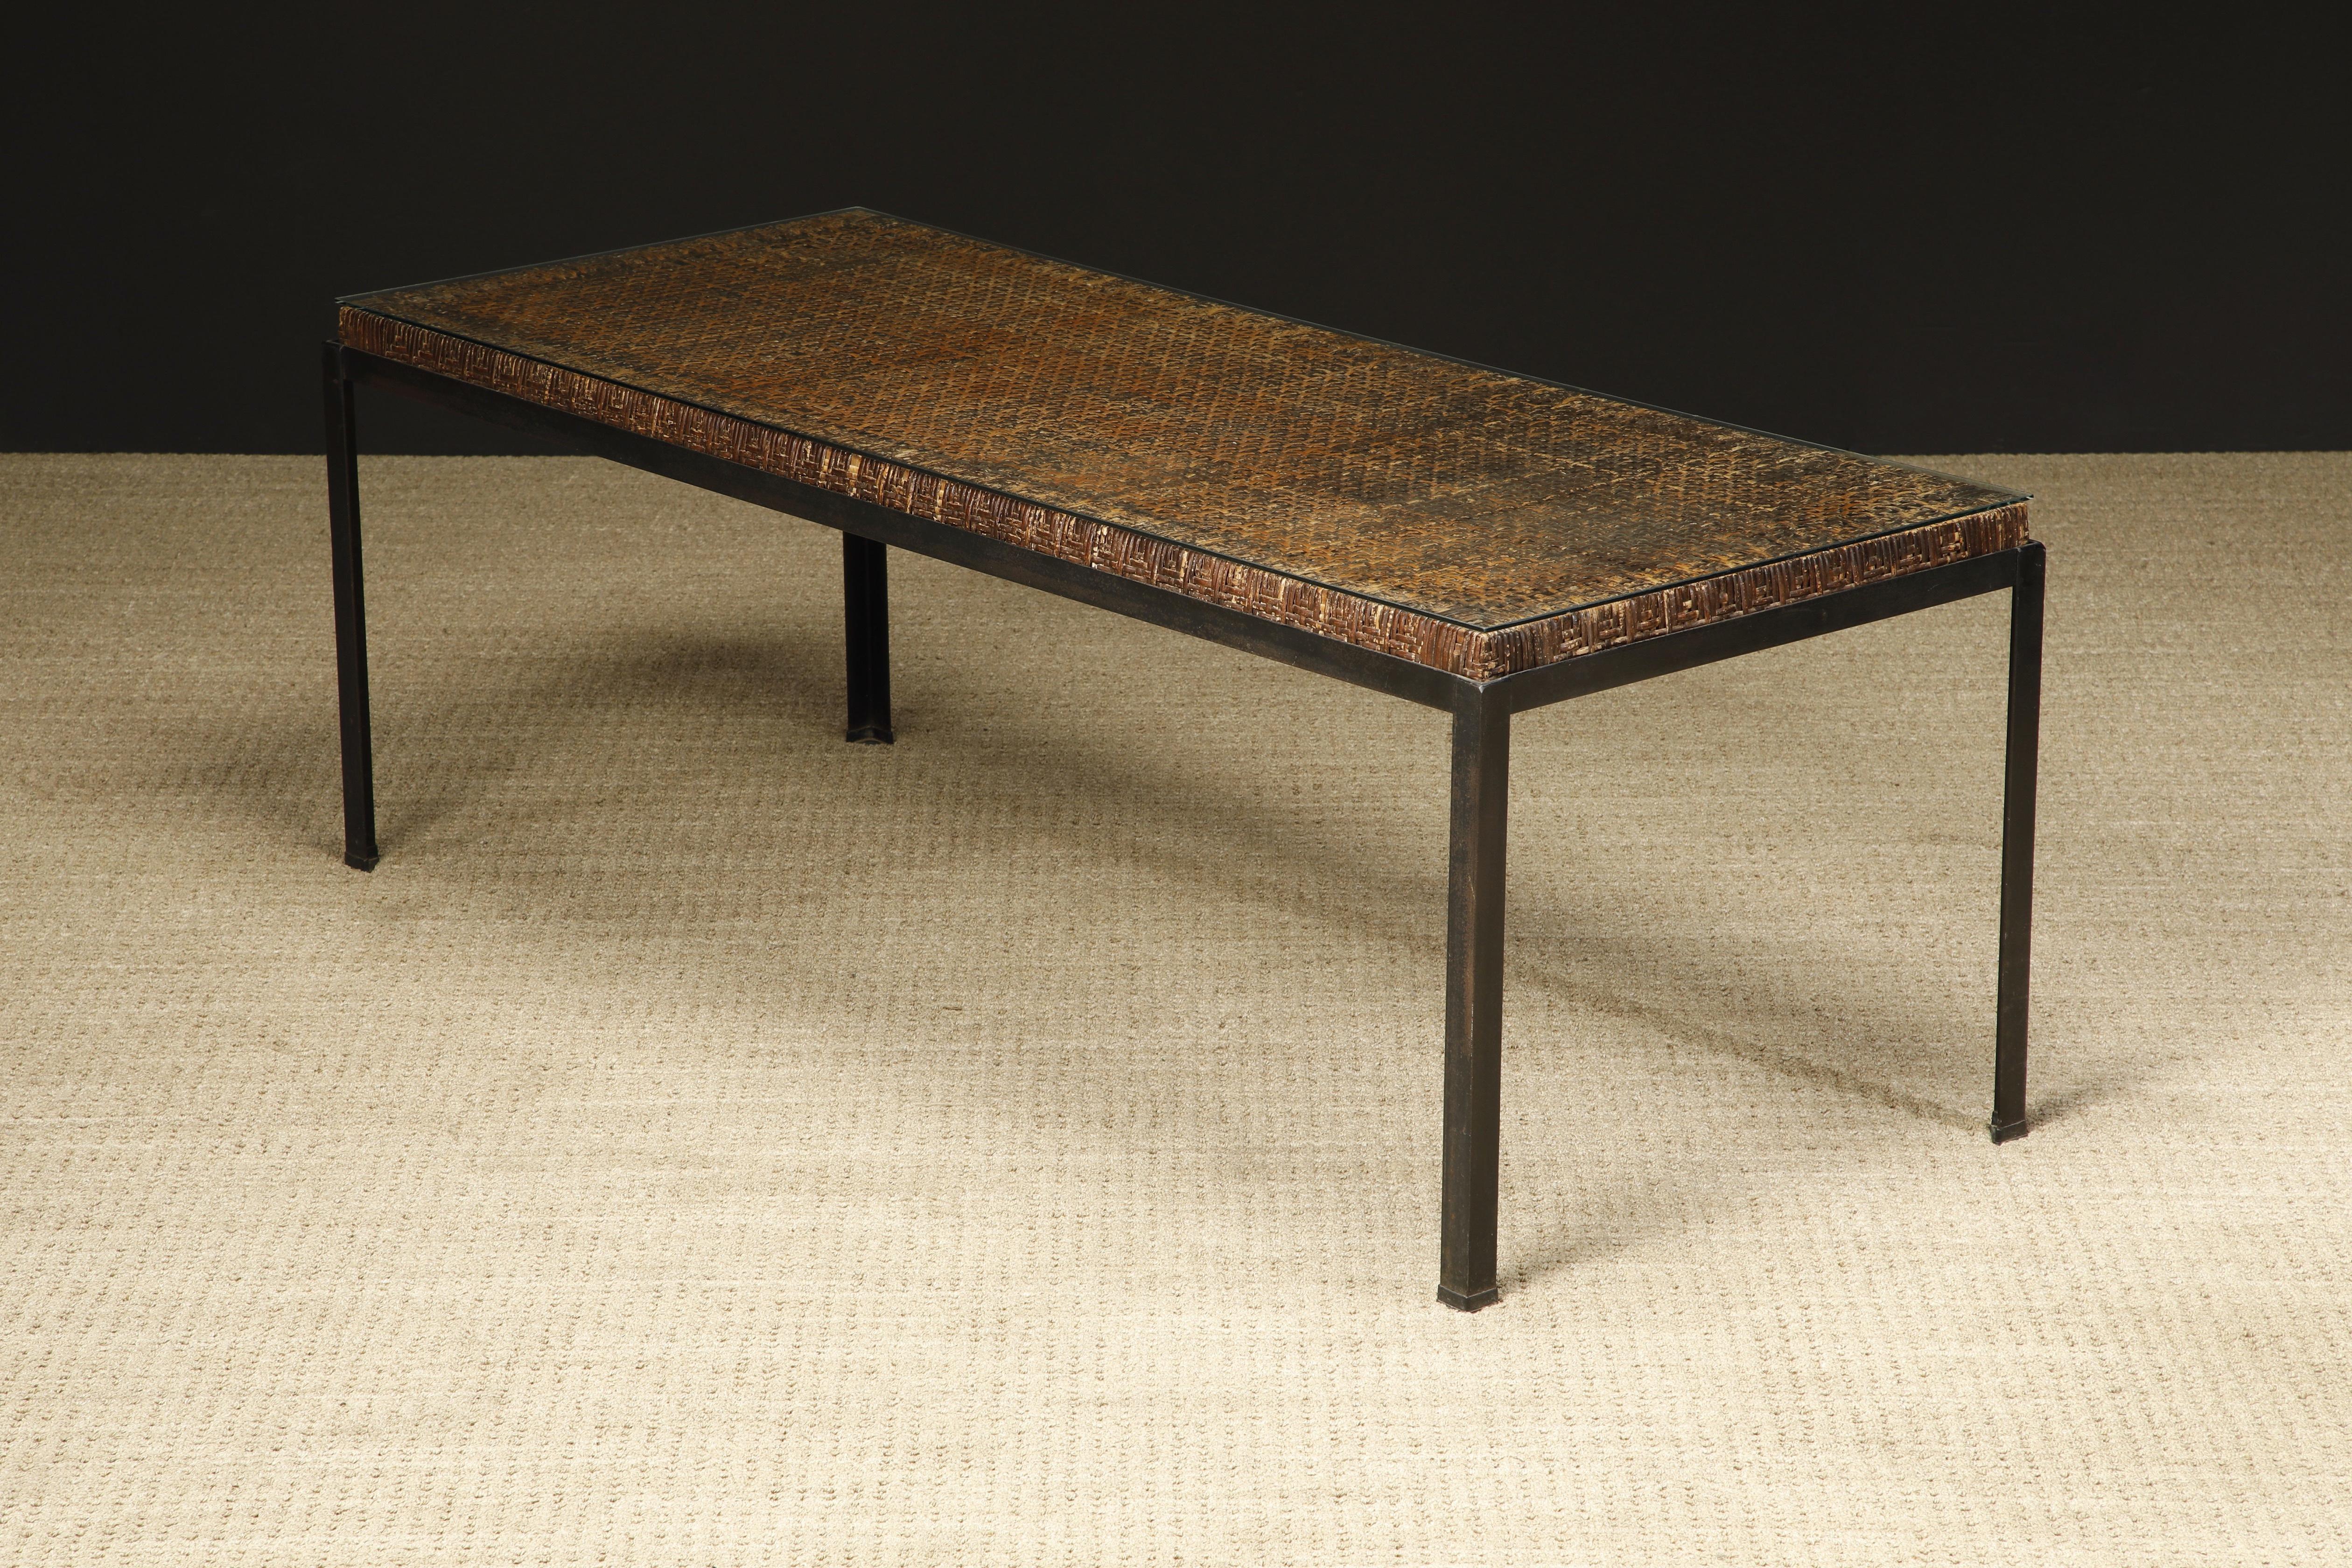 Caned Dining Table by Danny Ho Fong for Tropi-cal in Iron and Rattan, c 1960s For Sale 4